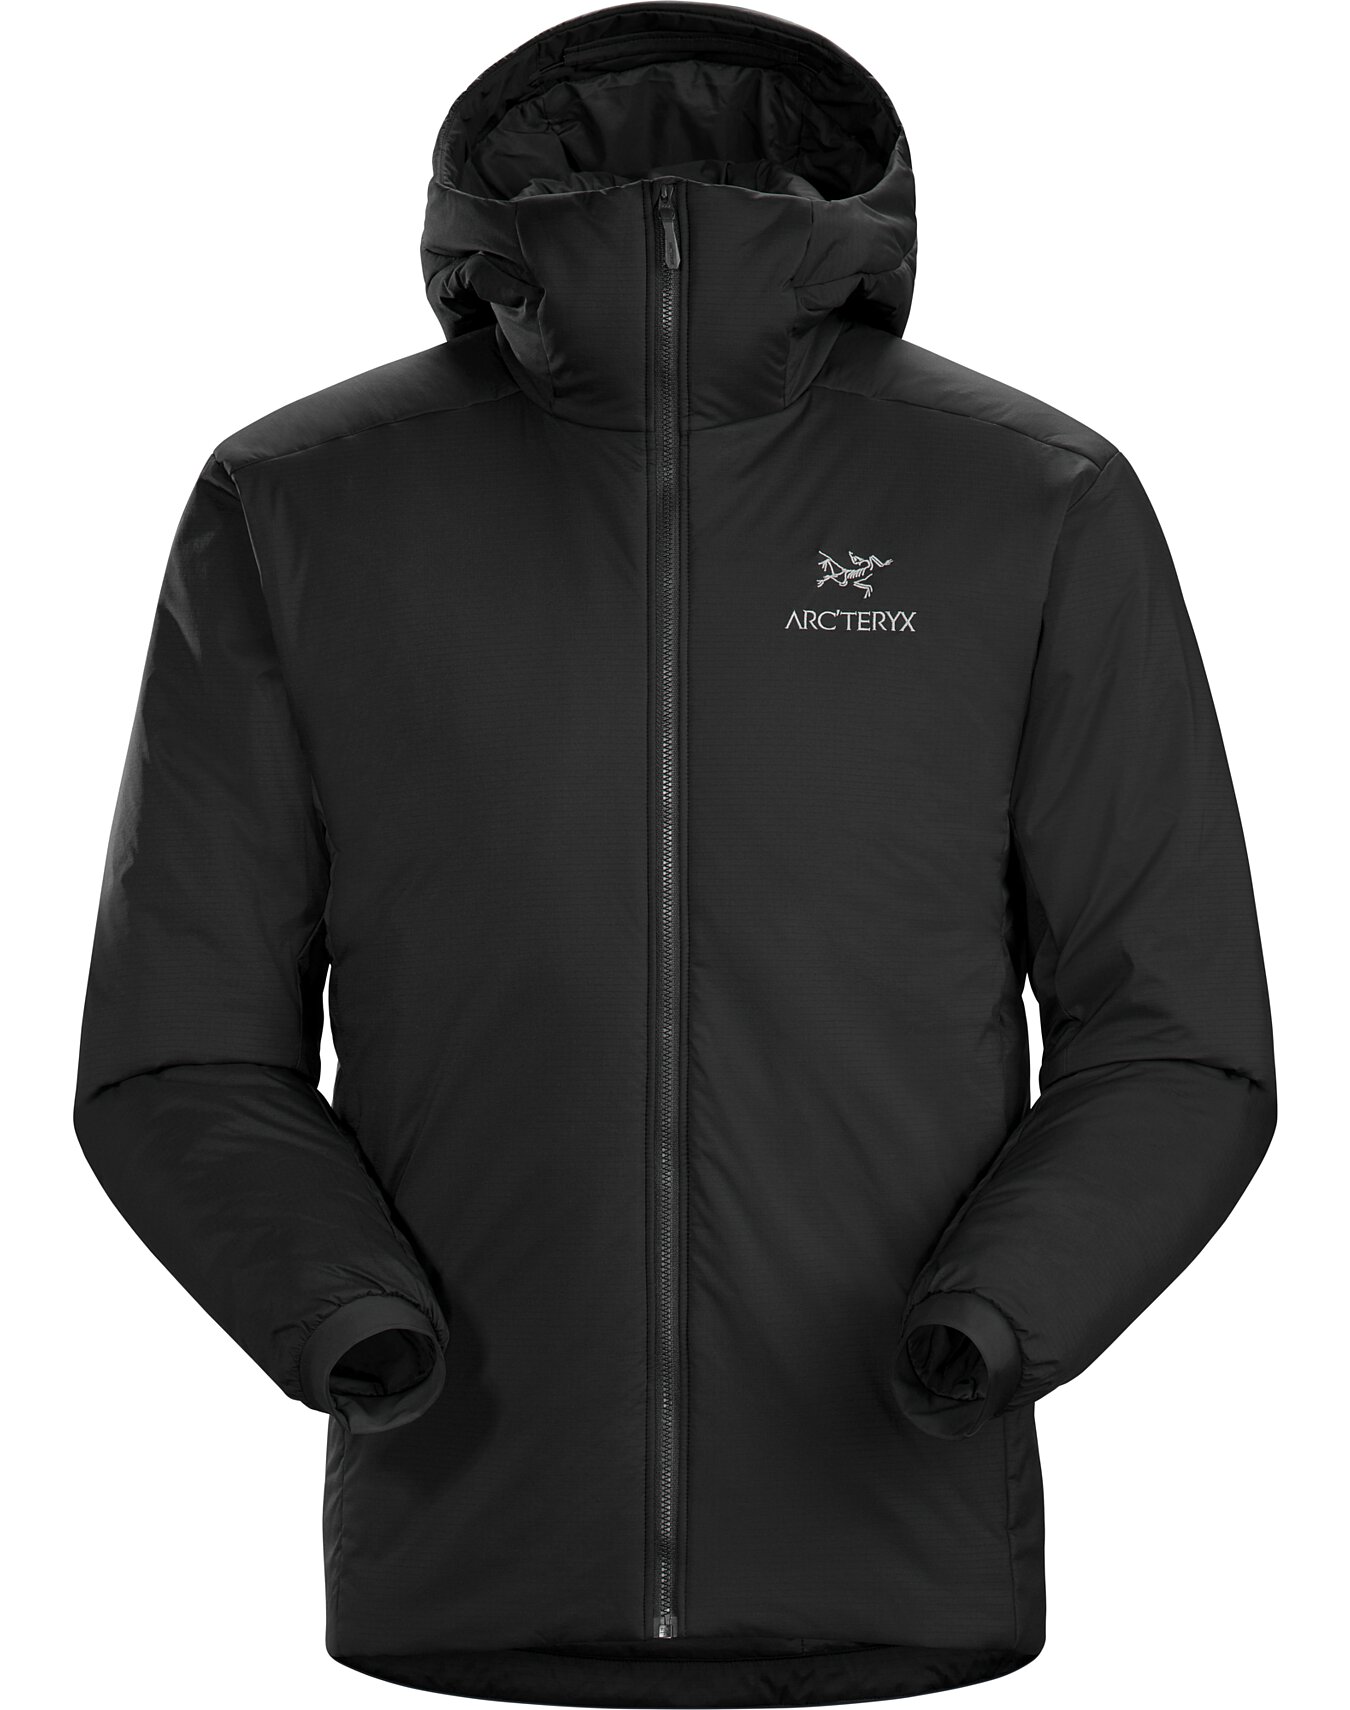 Warm Synthetic Insulation Hoody for All Round use. Arc'teryx Atom AR Hoody Men's